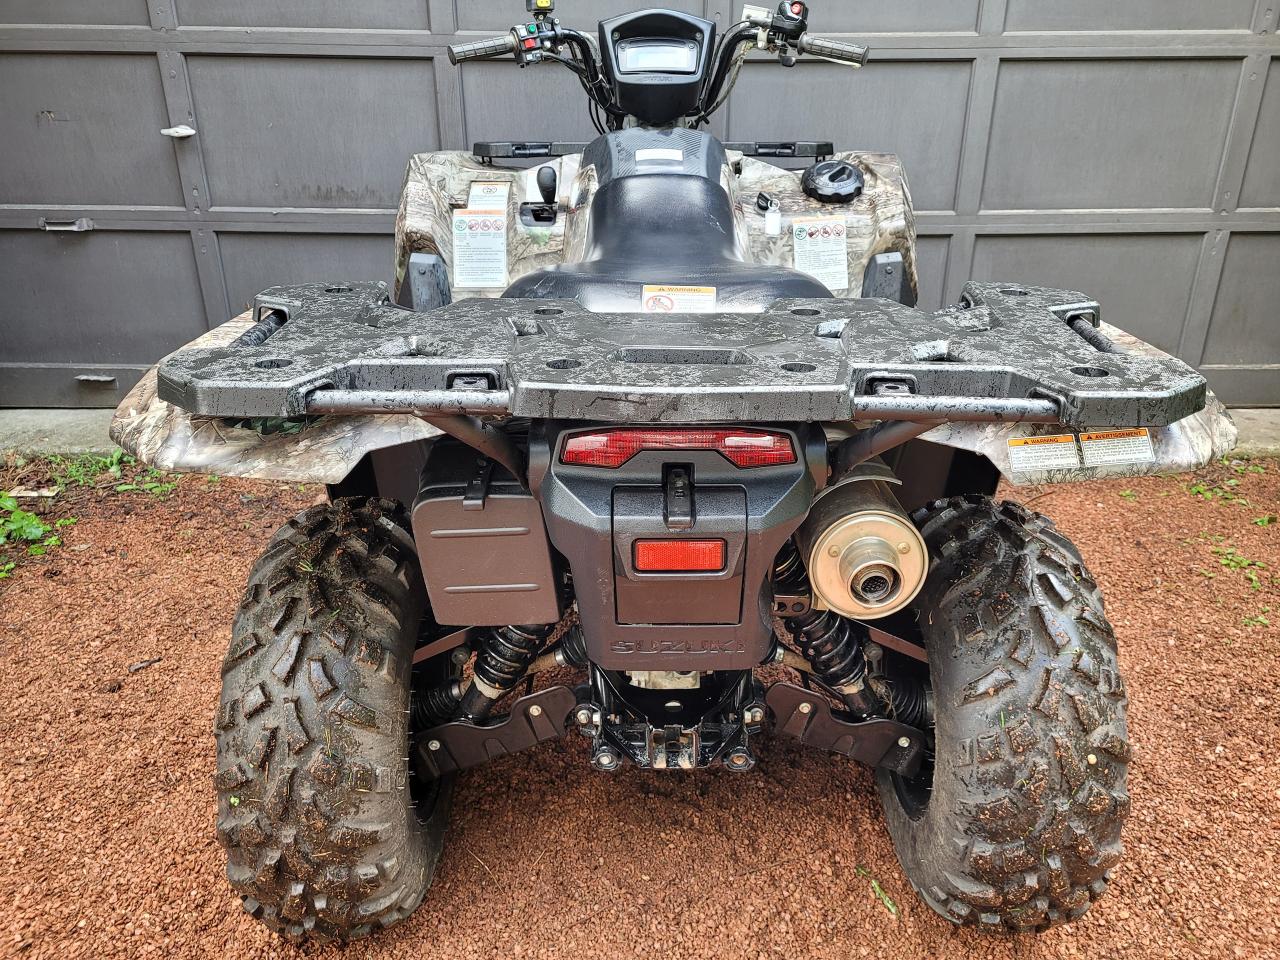 2022 Suzuki KingQuad 750AXi  EPS *1-Owner* Financing Available Trade-in Welcome - Photo #4